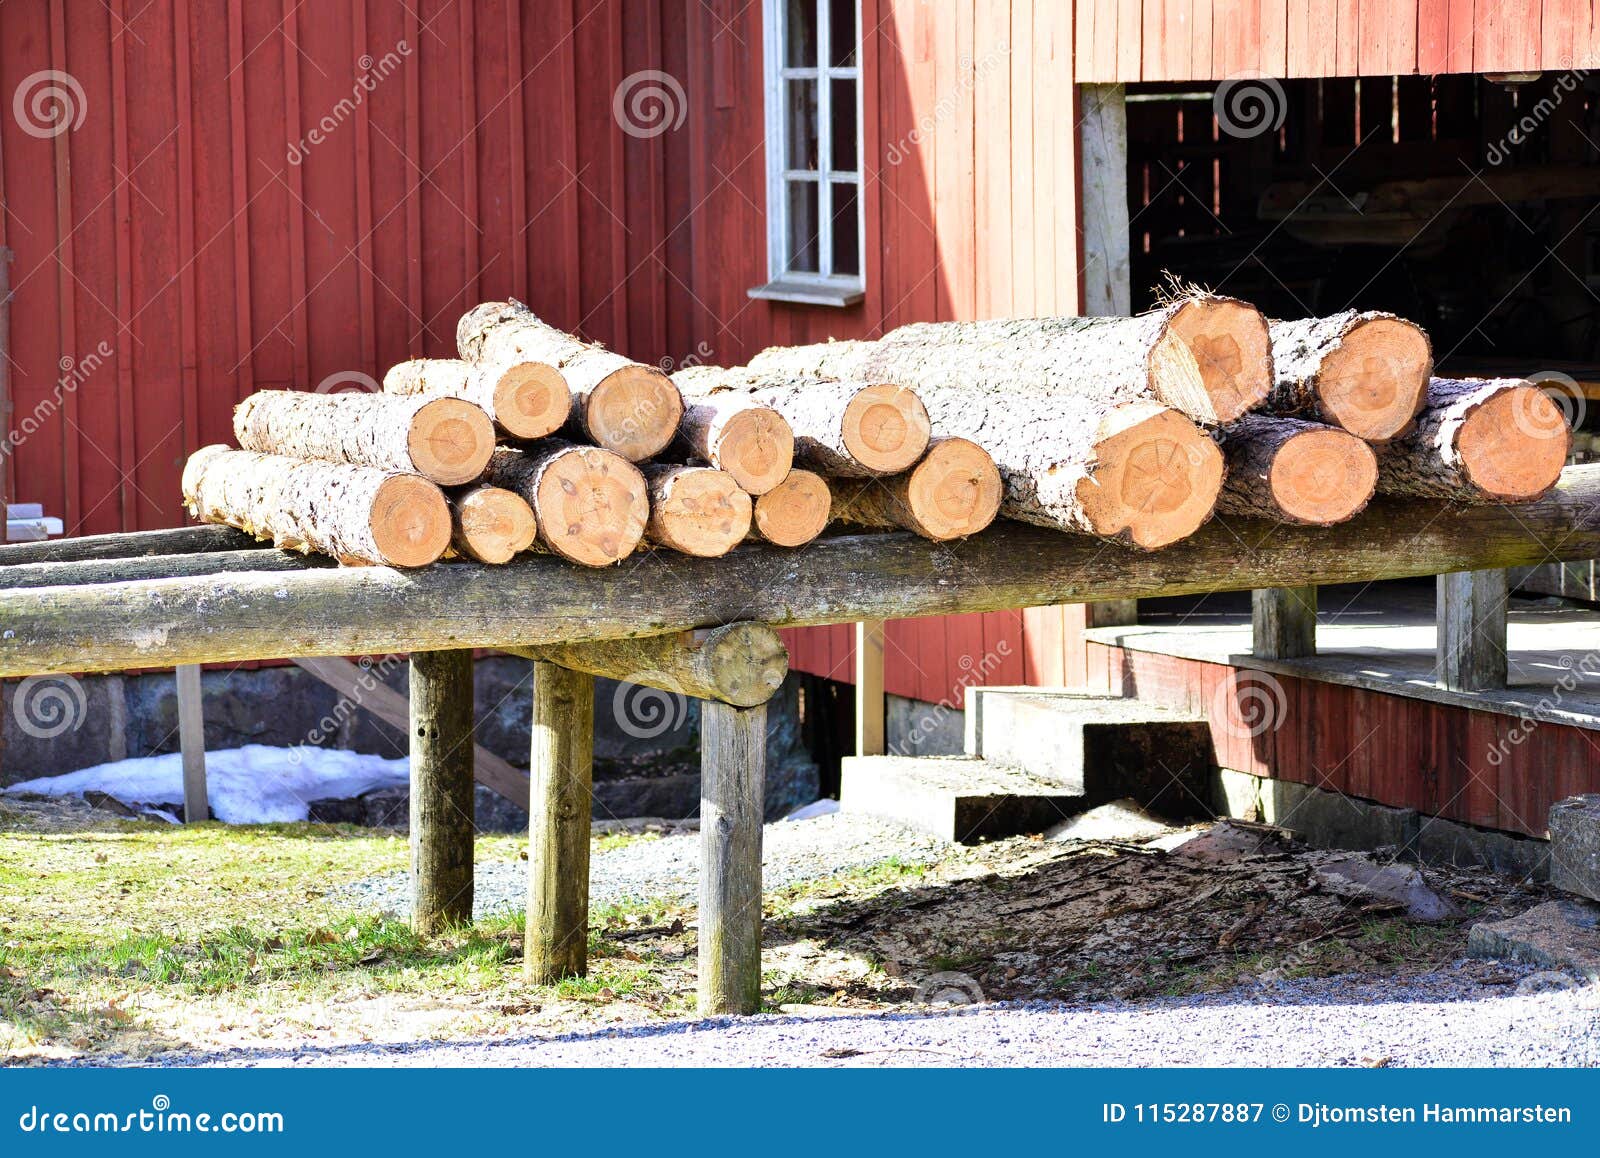 The Old Saw Mill Out at the Country in Sweden Stock Image - Image of  lumber, sawmill: 115287887